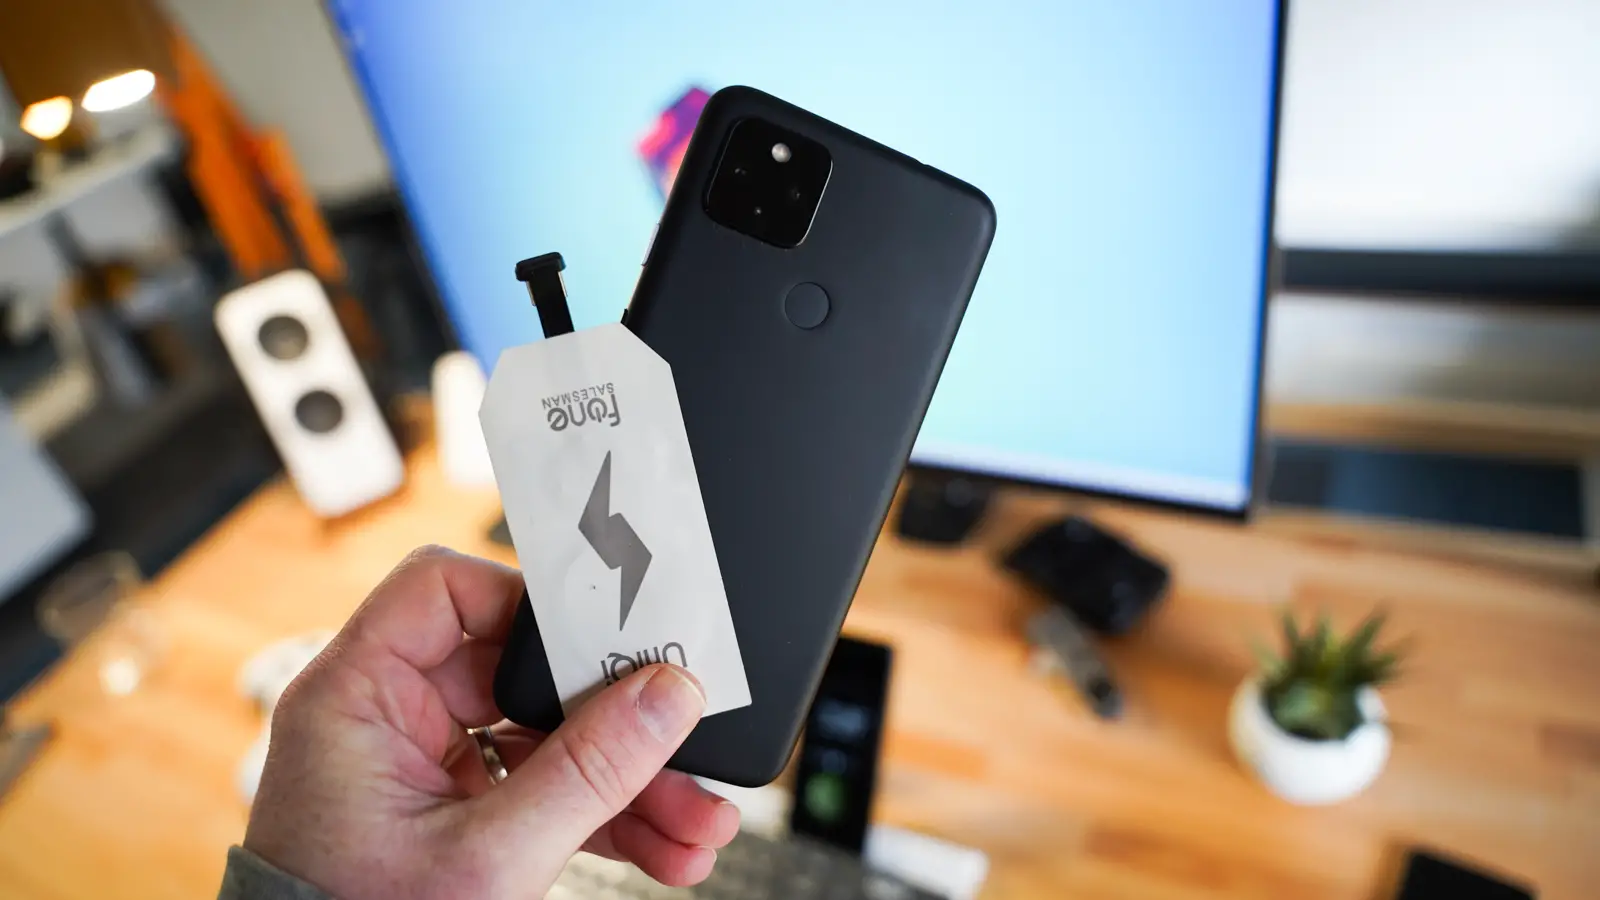 How to add wireless charging to the Pixel 4a and Pixel 4a 5G